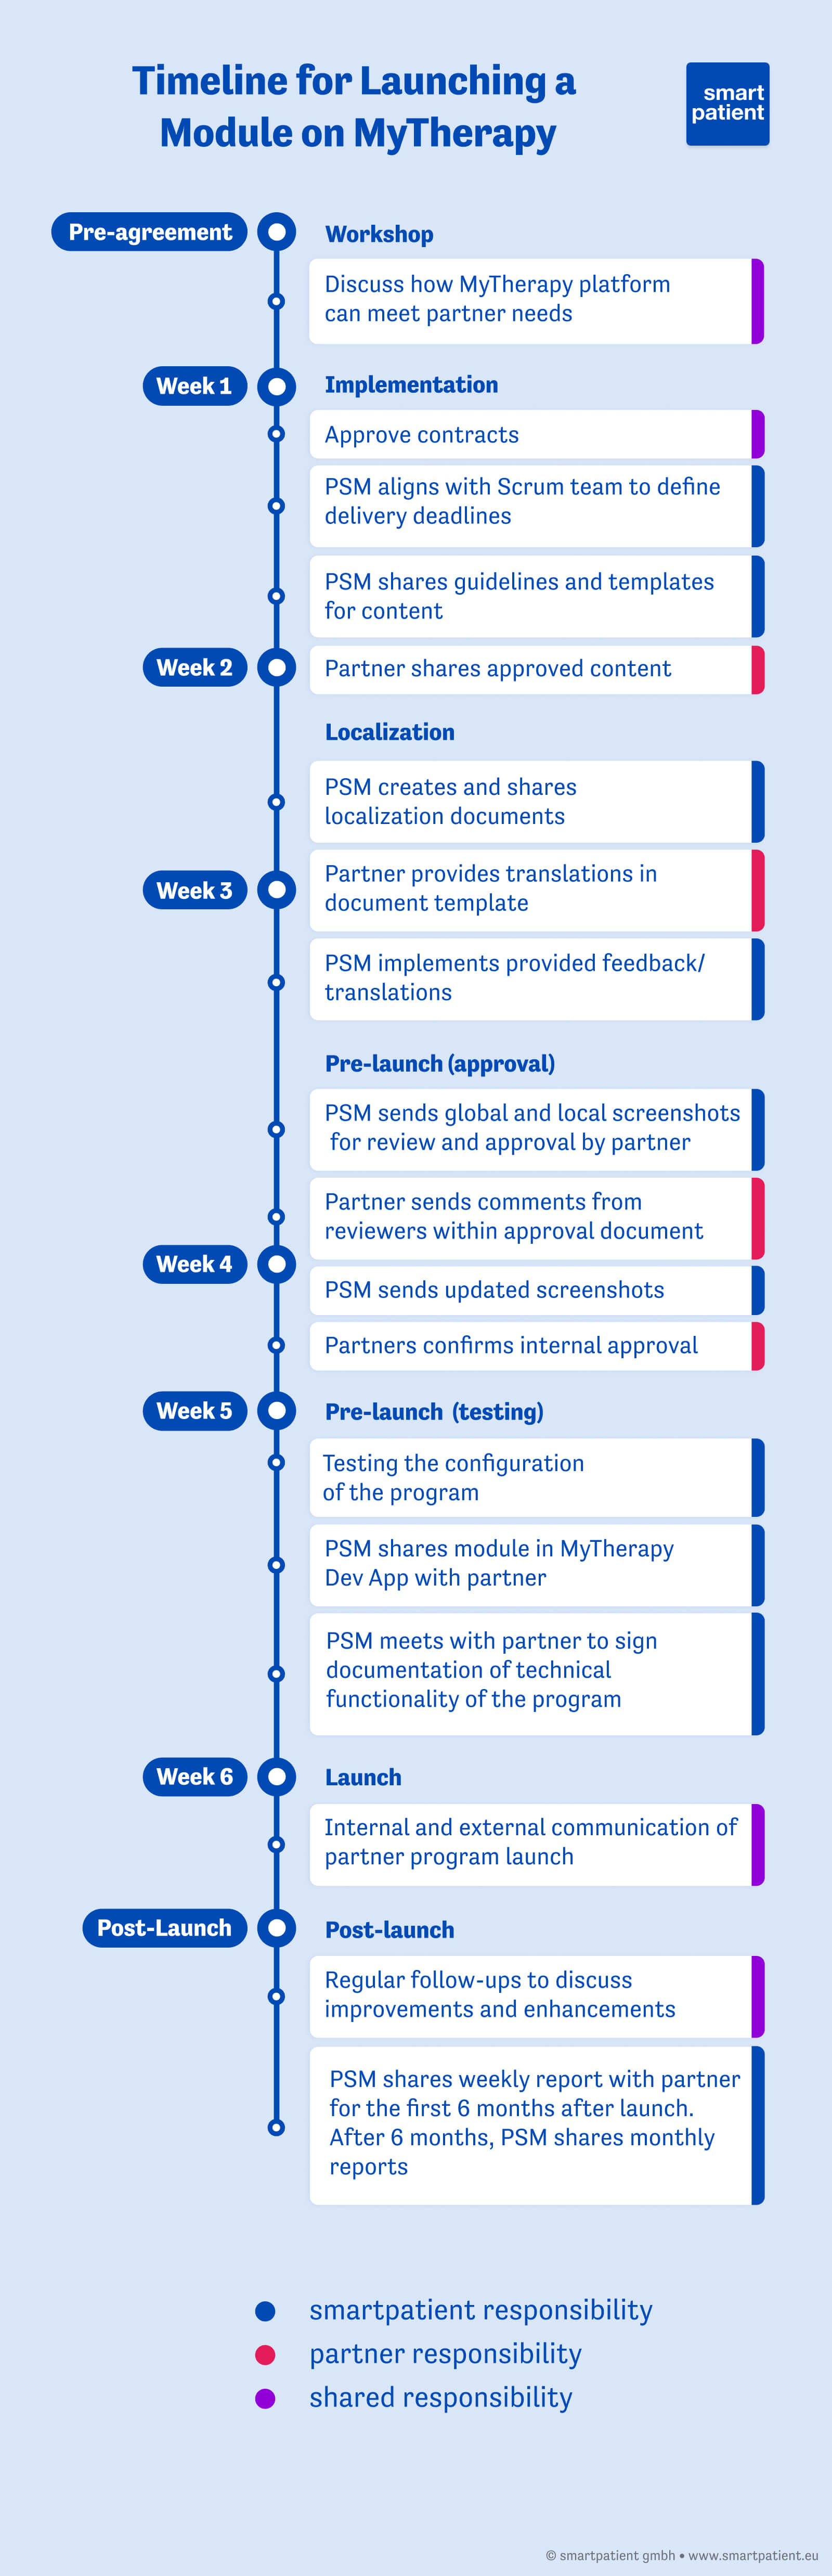 Timeline showing how pharma can launch a module on MyTherapy in six weeks. id: Timeline